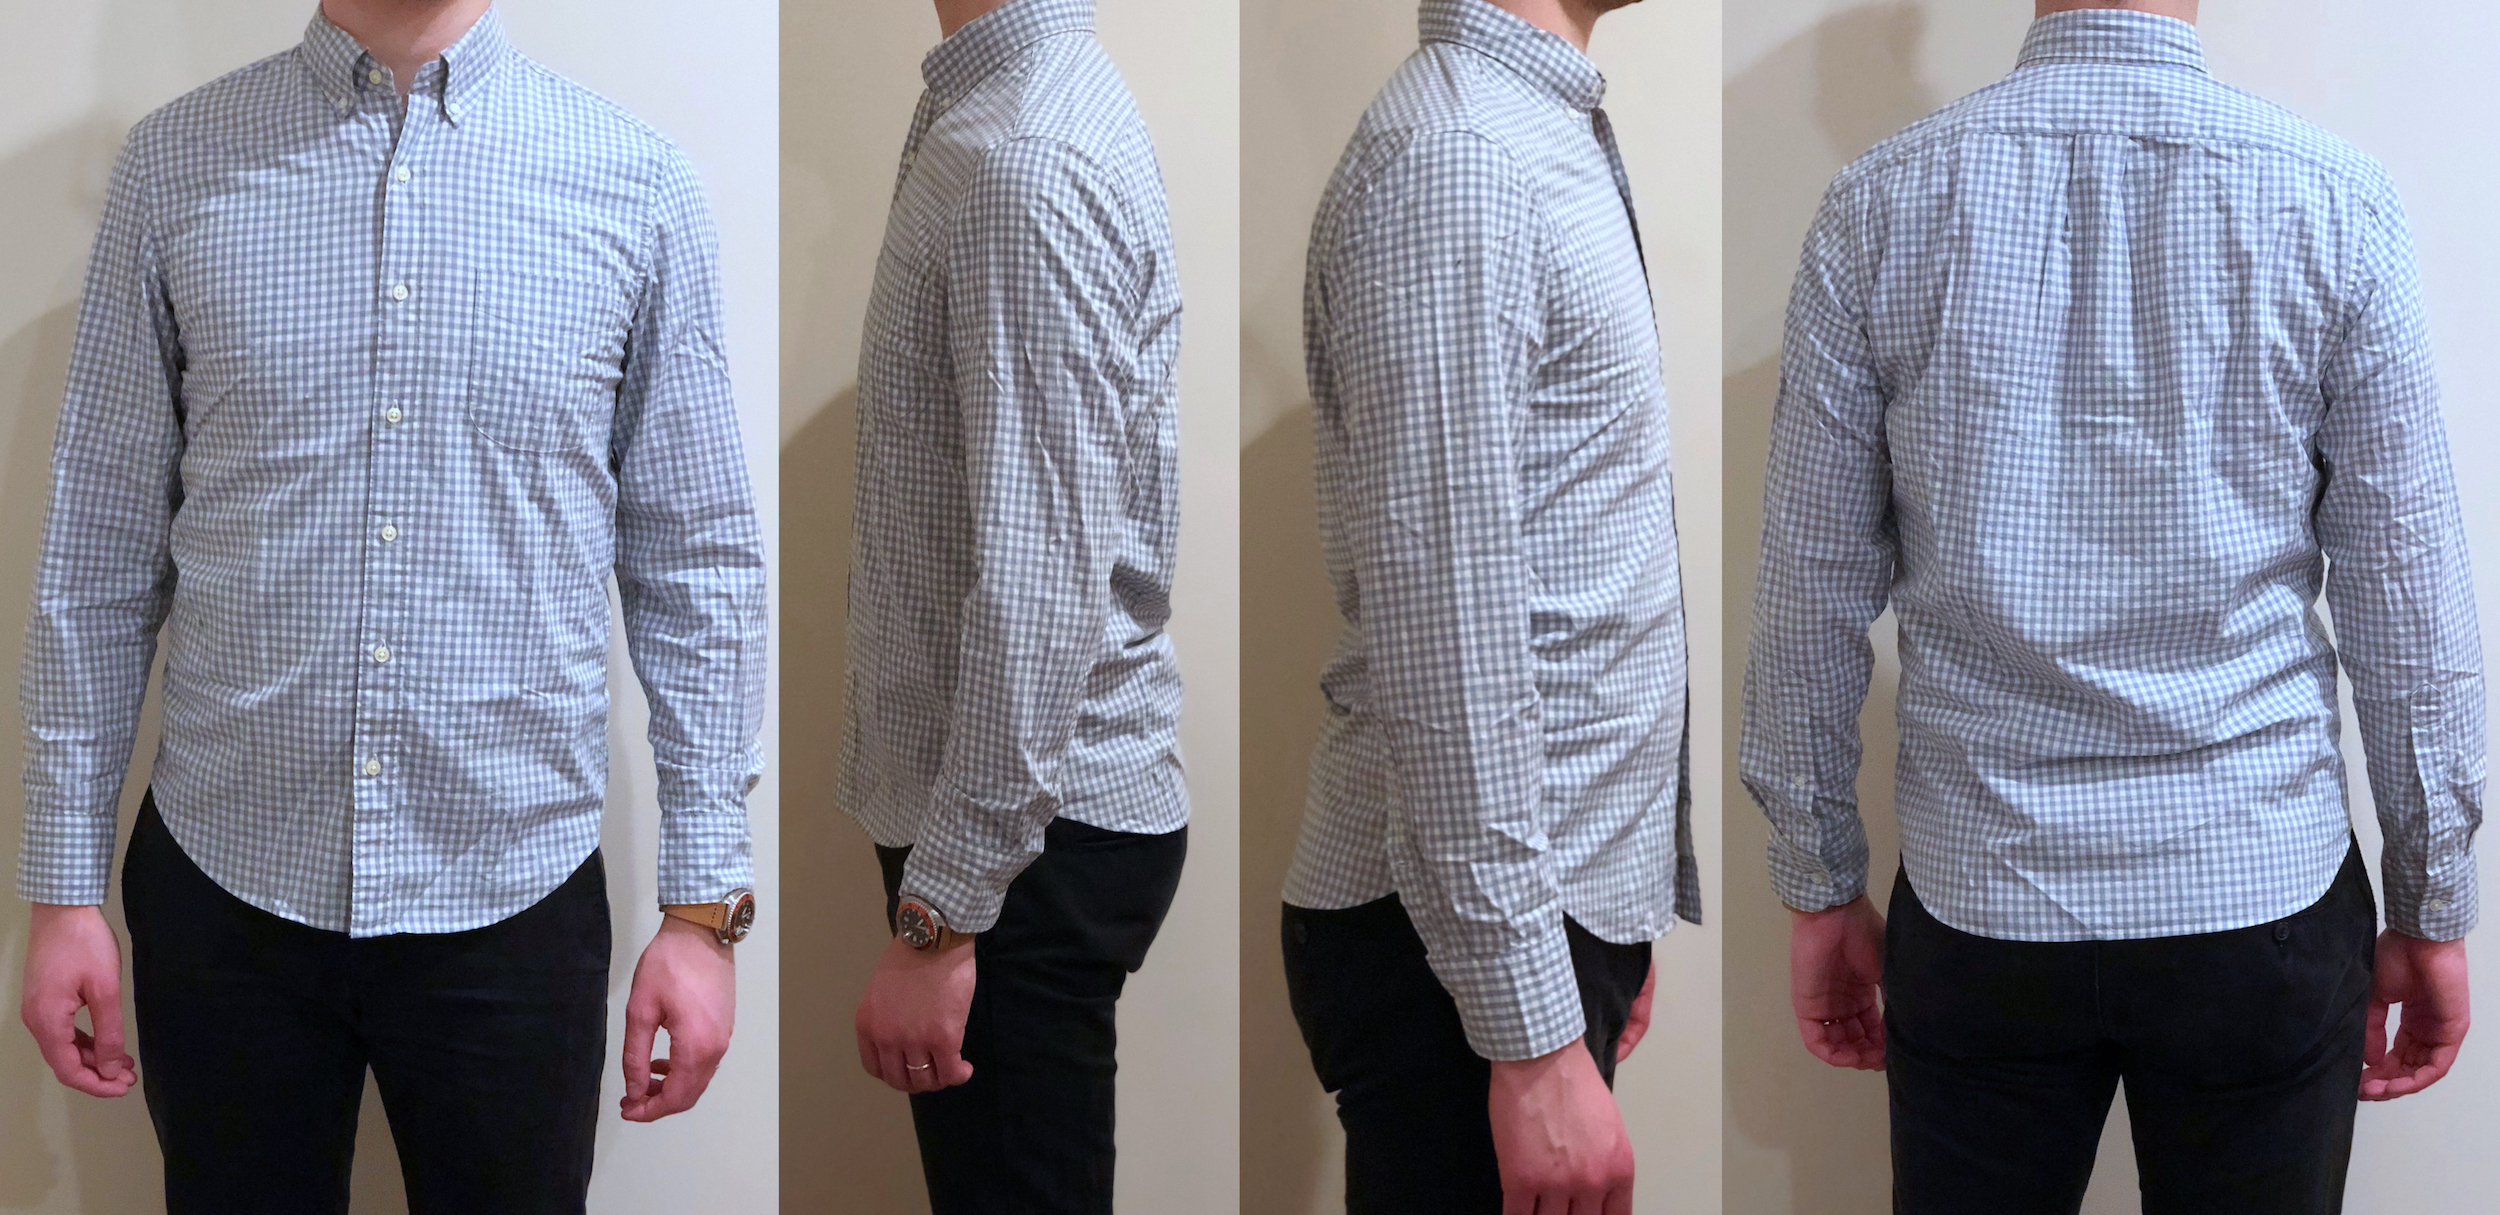 J Crew ‘Untucked’ Fit Shirts: A Comprehensive Review and Fit Comparison ...